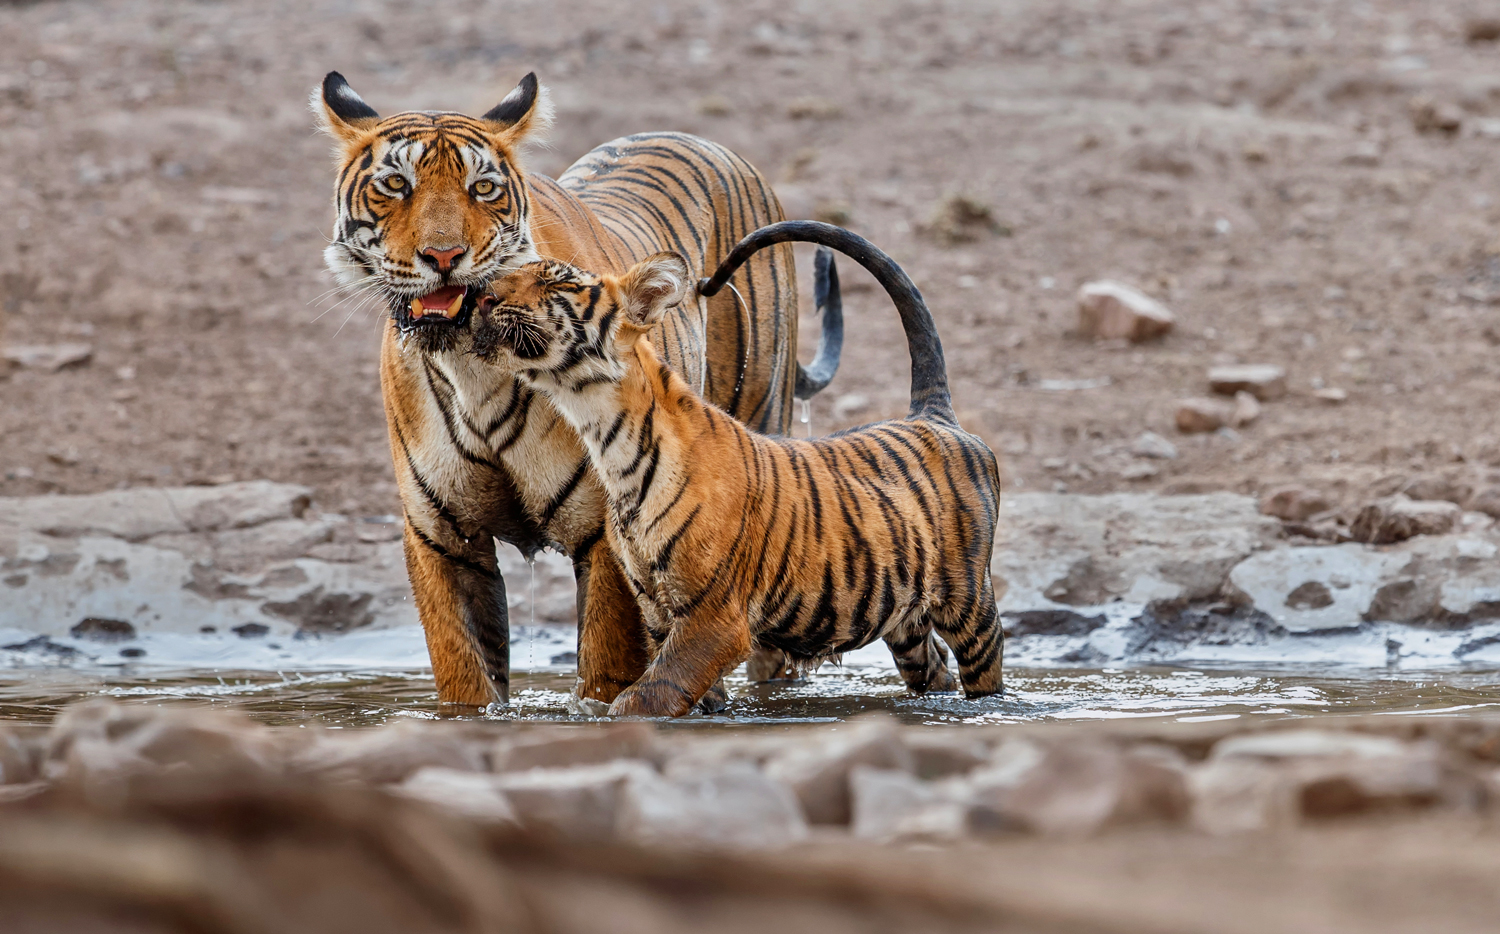 A tiger cub nuzzles its mother as they stand in a puddle of water on a muddy plain.